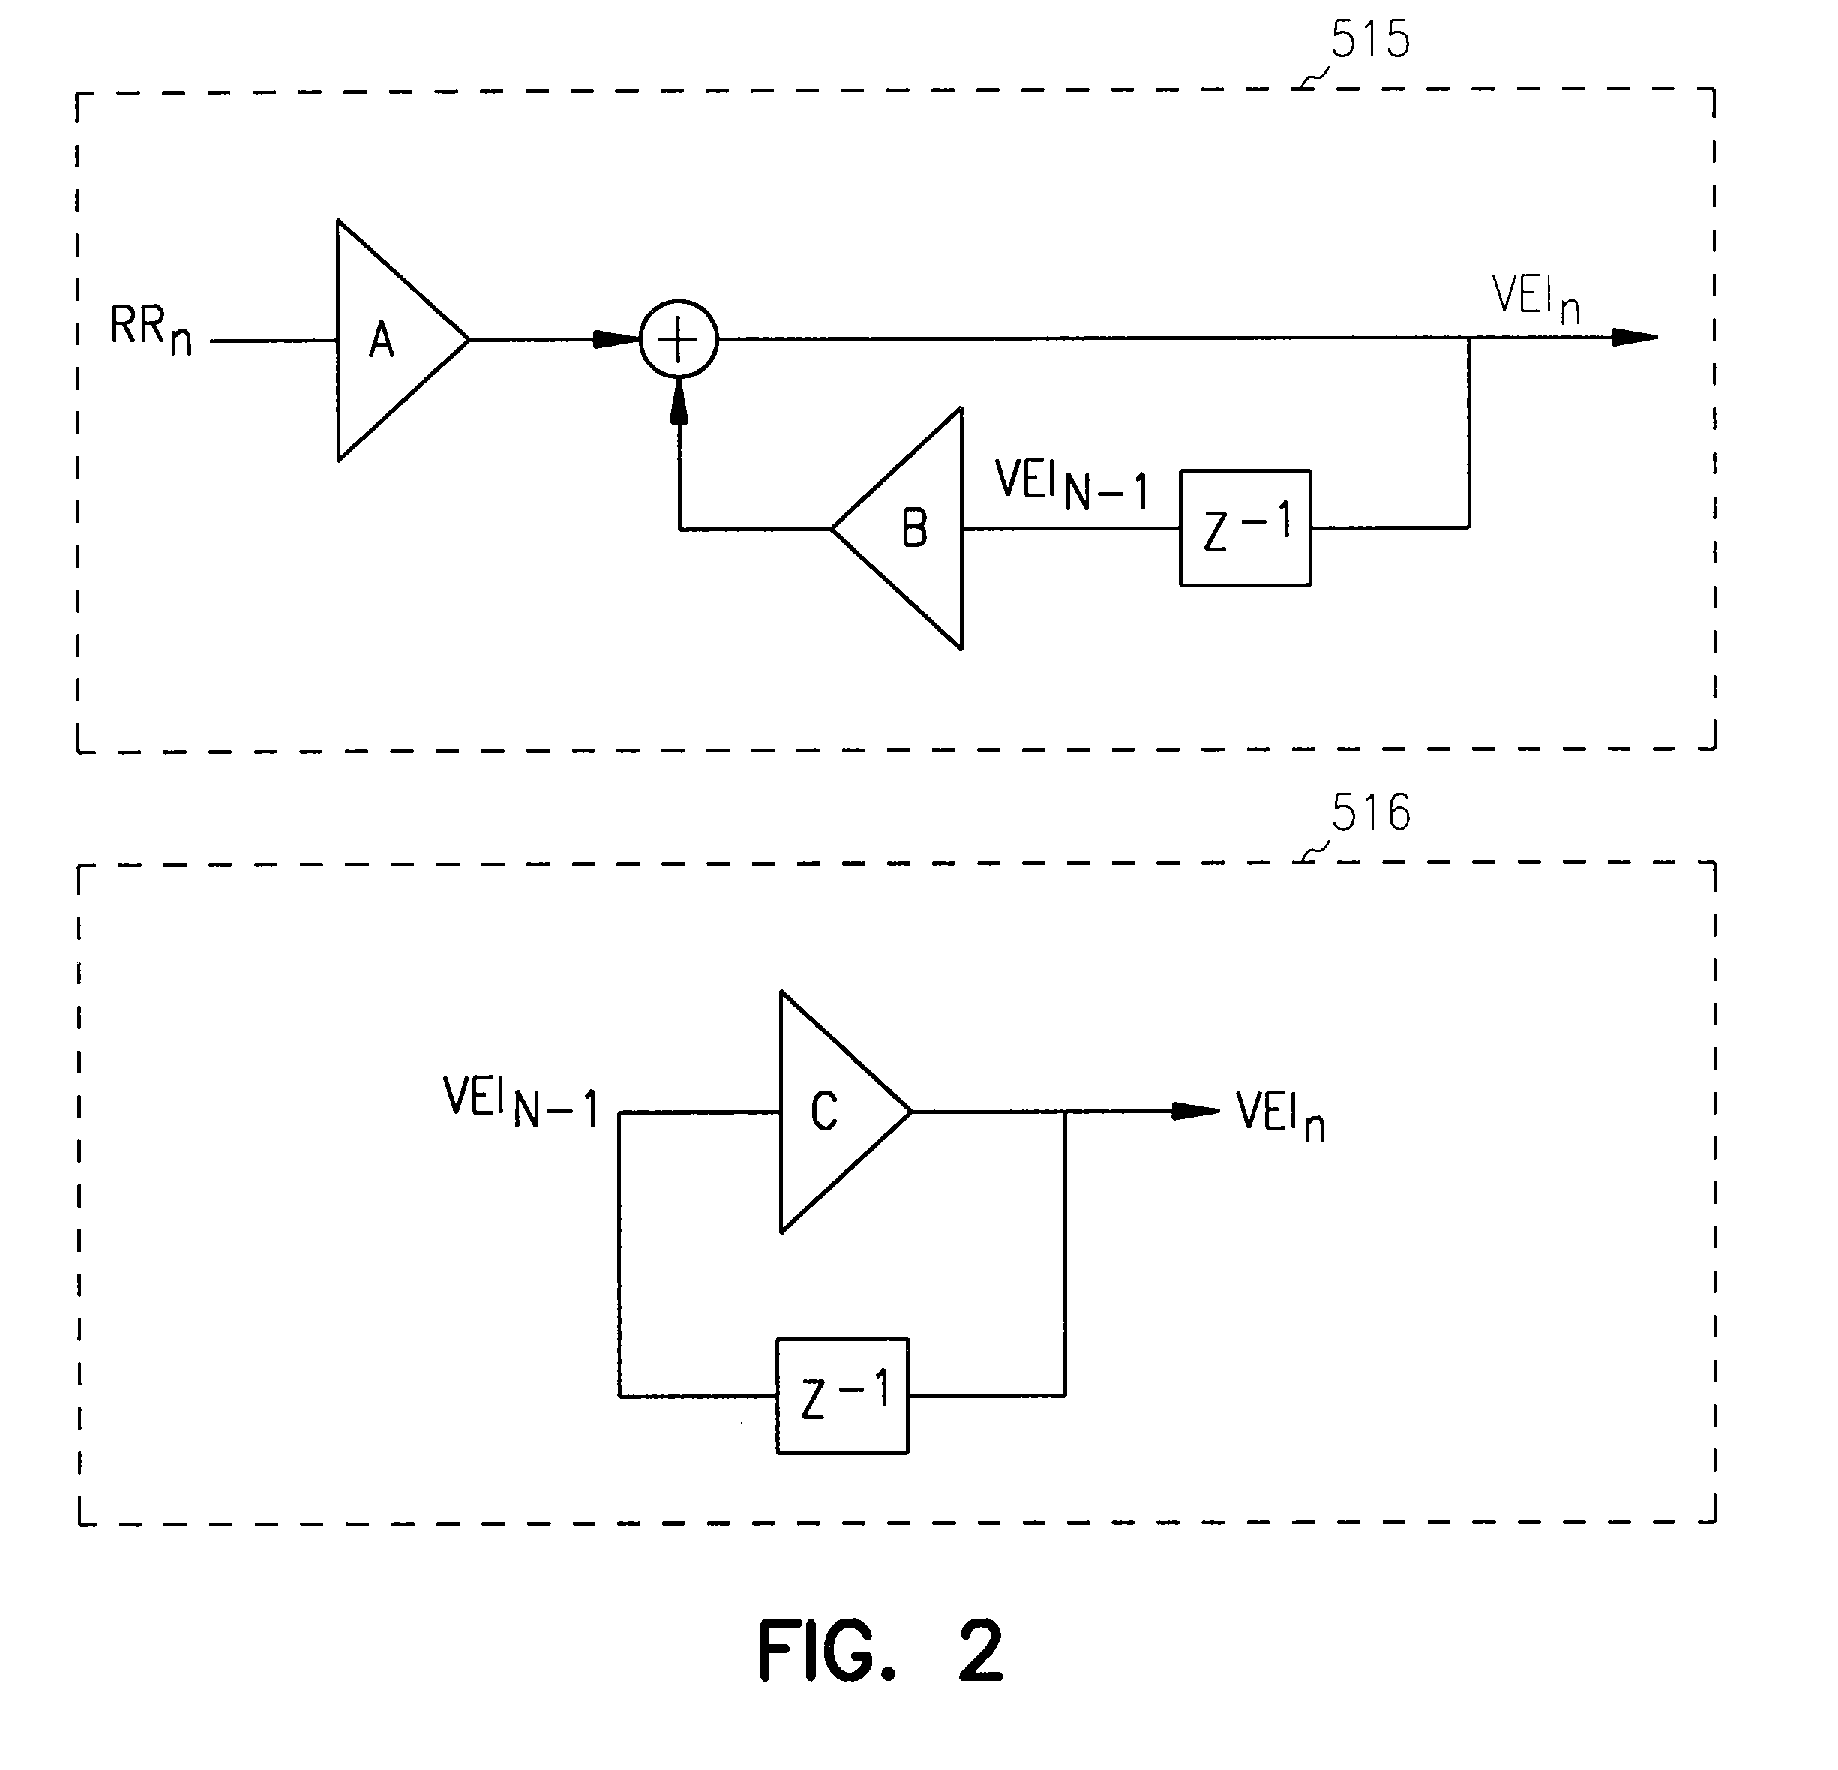 Apparatus and method for pacing mode switching during atrial tachyarrhythmias